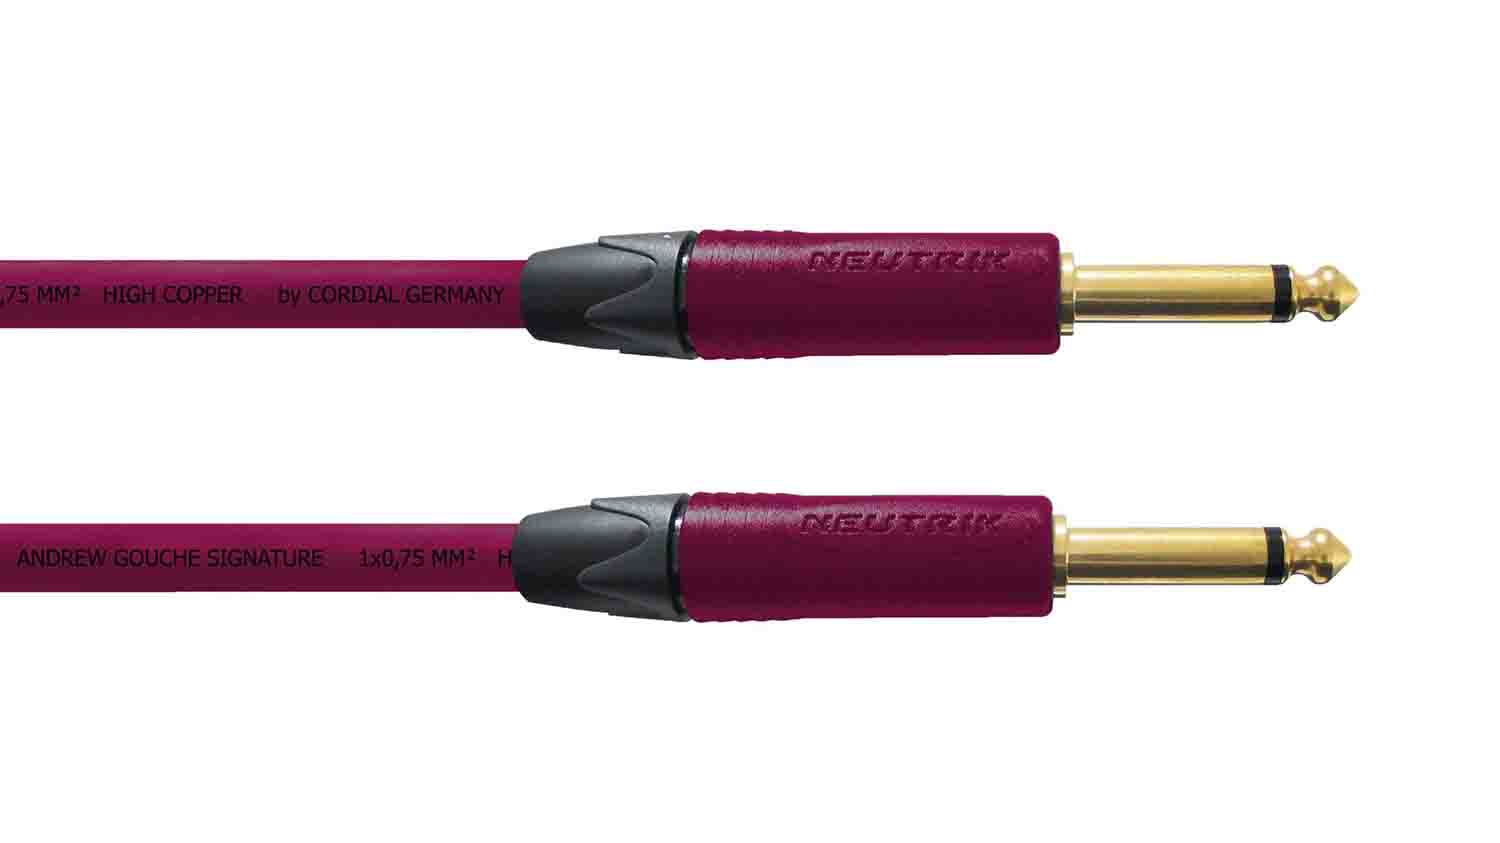 Cordial CSI PP-Andrew Gouché, 1/4" TS Male to TS Male Instrument Cable - Hollywood DJ